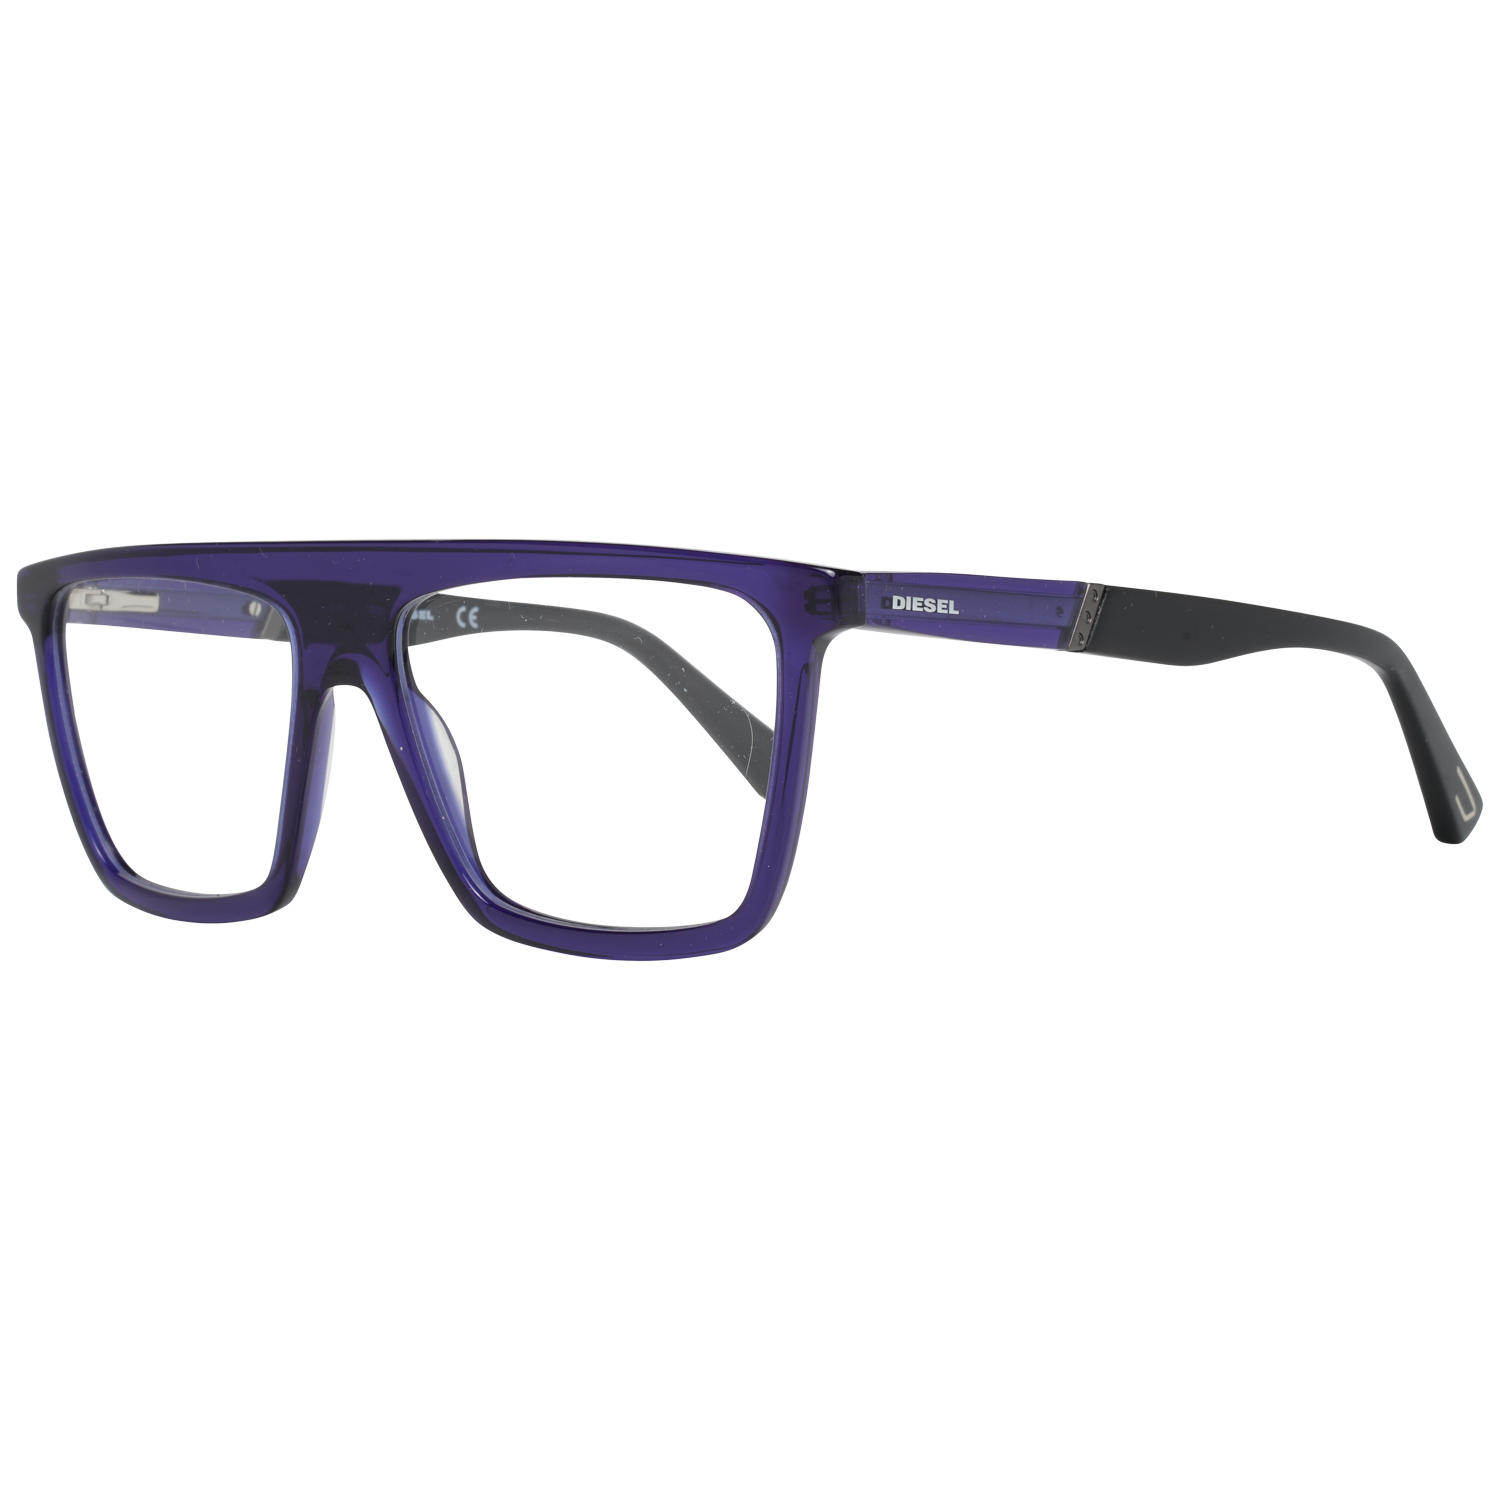 GenderMenMain colorBlueFrame colorBlueFrame materialPlasticSize56-16-145Lenses width56mmLenses heigth41mmBridge length16mmFrame width143mmTemple length145mmShipment includesCase, Cleaning clothStyleFull-RimSpring hingeYesExtraNo extra